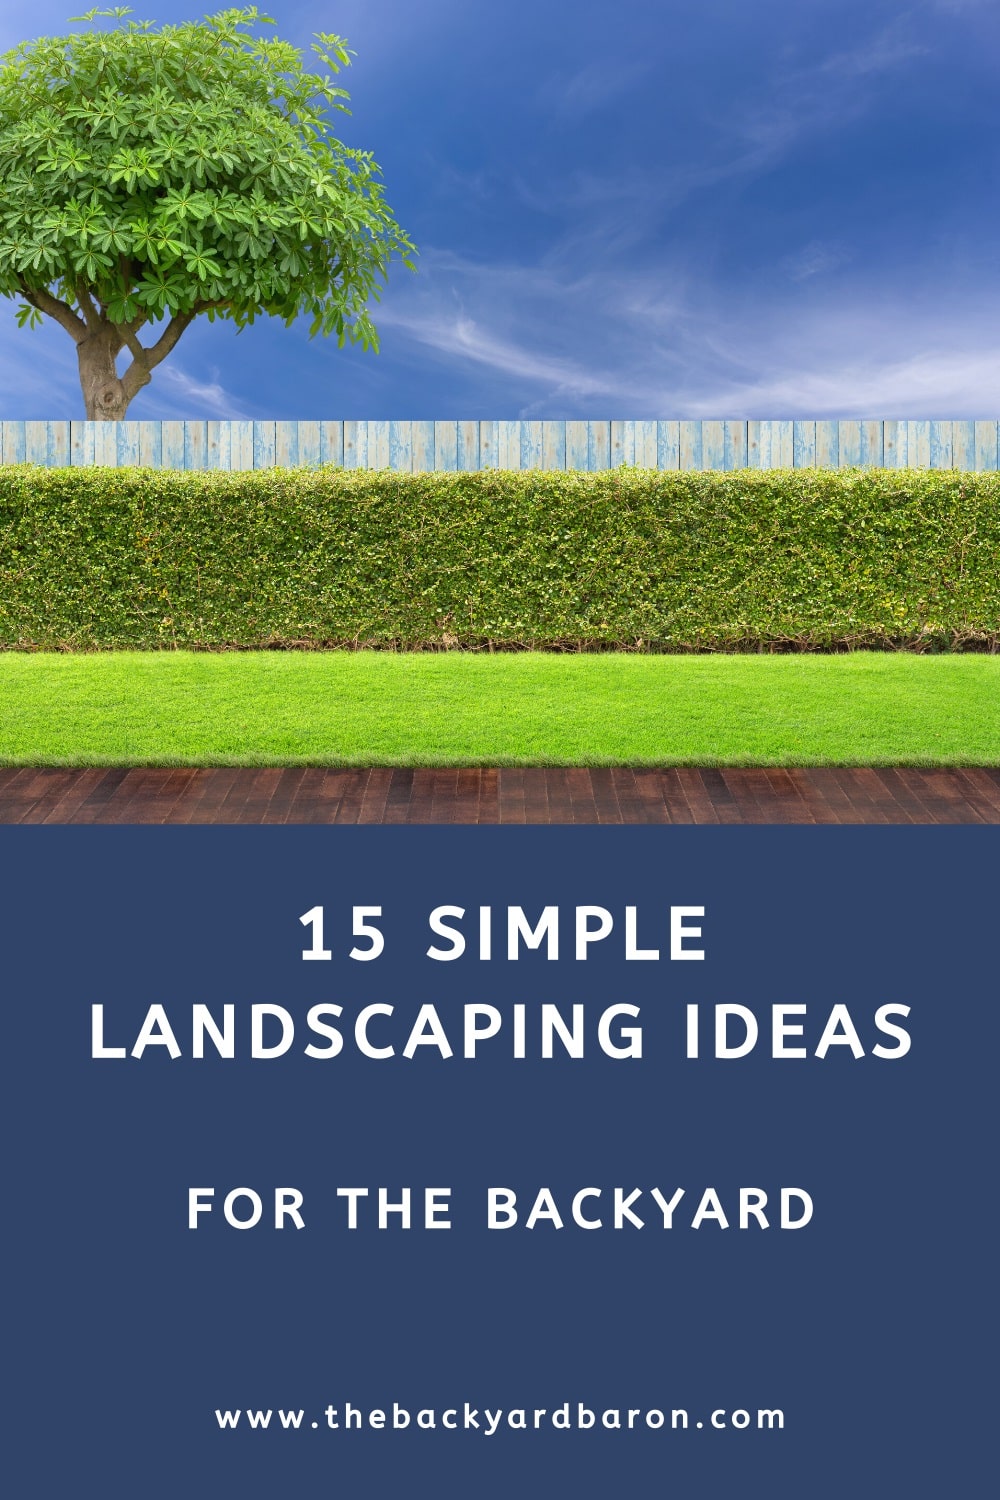 15 Simple landscaping ideas for the backyard